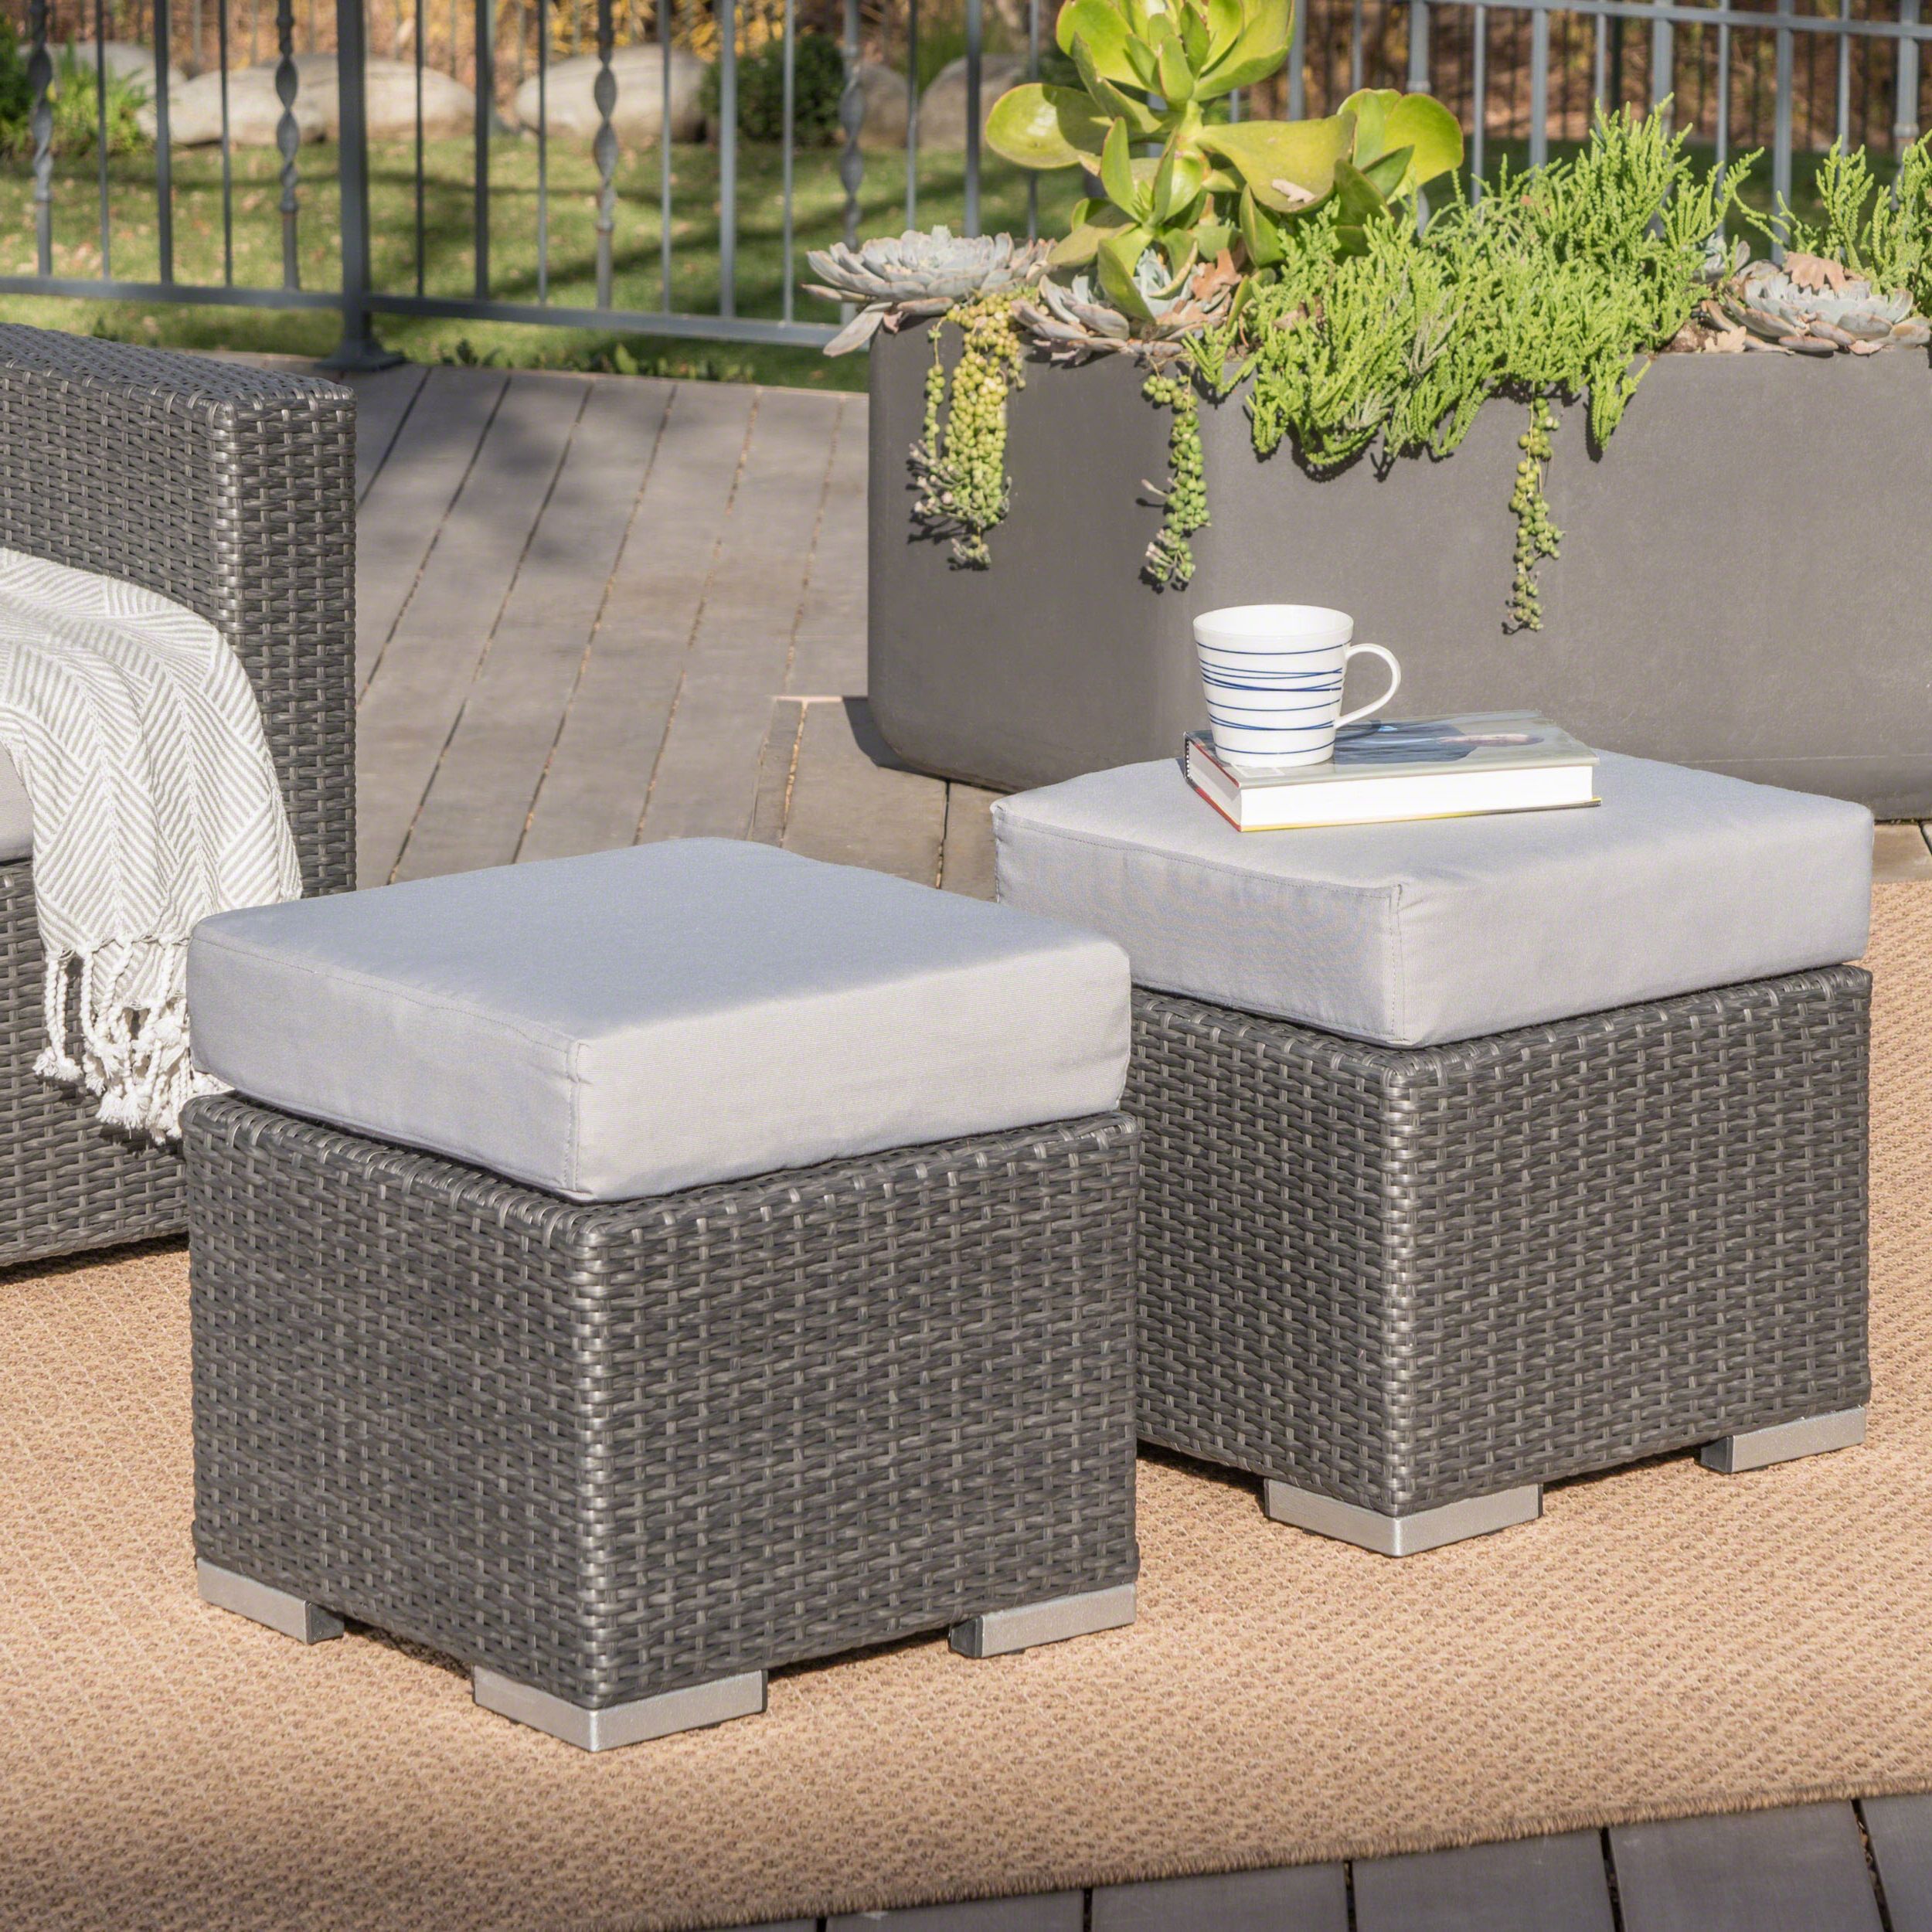 16 Inch Ottomans Intended For Favorite Avianna Outdoor 16 Inch Wicker Ottoman Seat With Cushion, Set Of 2, Grey,  Silver – Walmart (View 9 of 15)